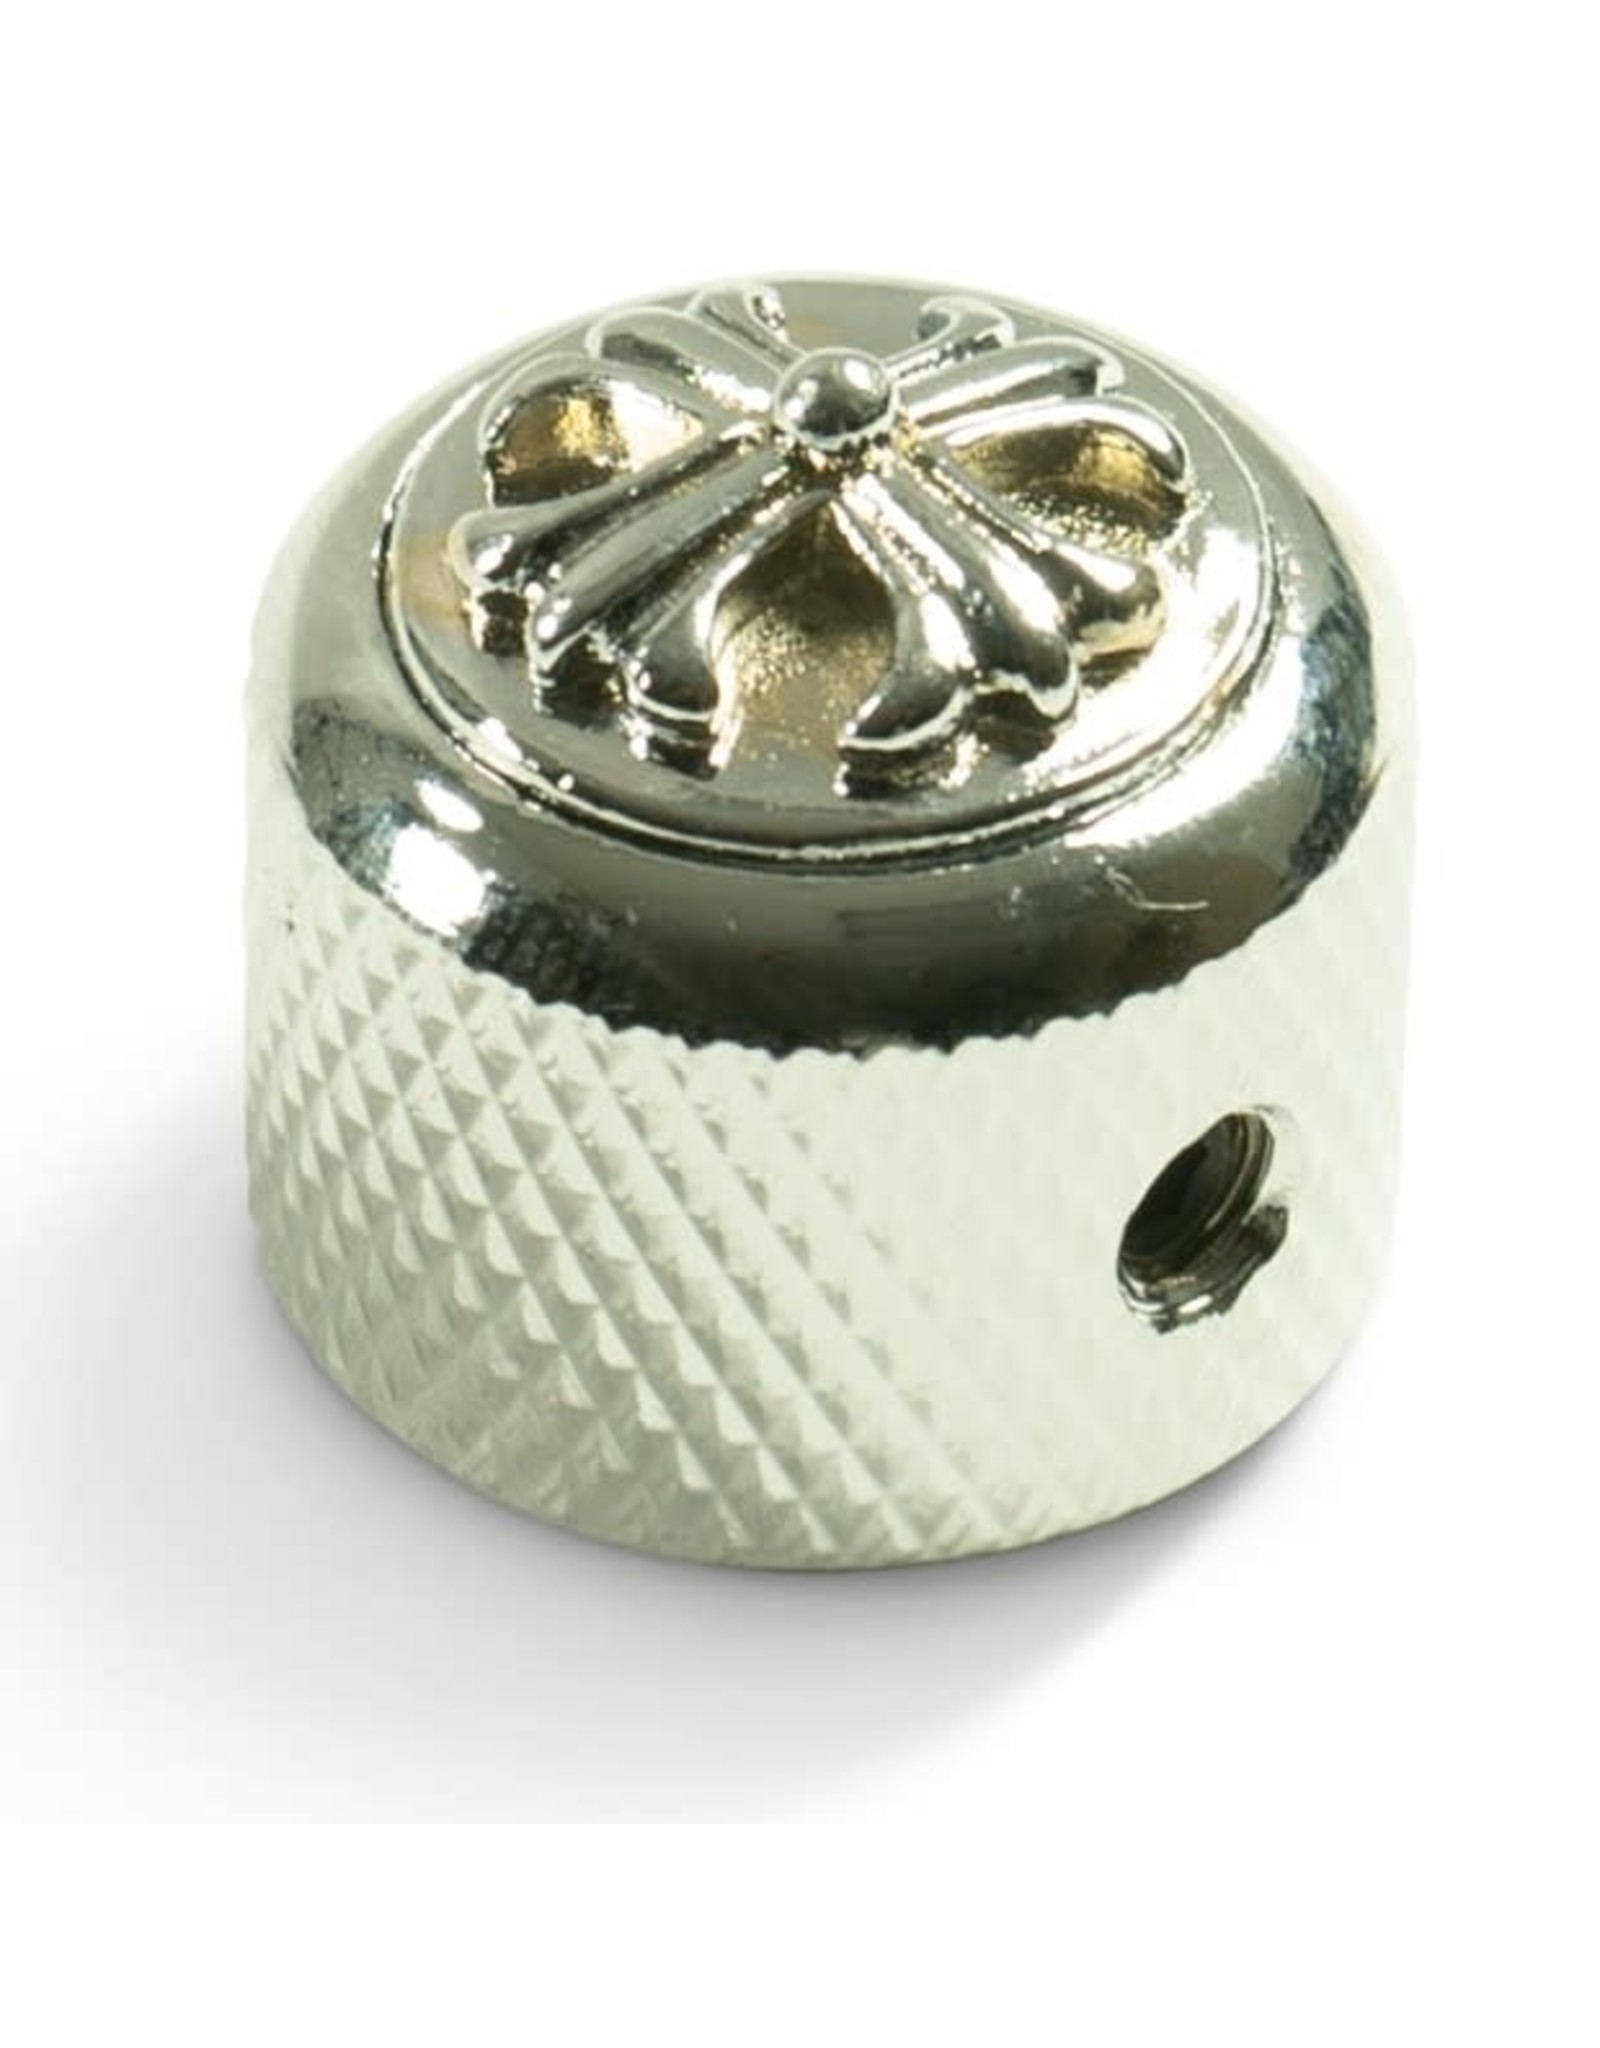 Q-Parts Q-Parts Knob With Cross Inlay Dome Chrome